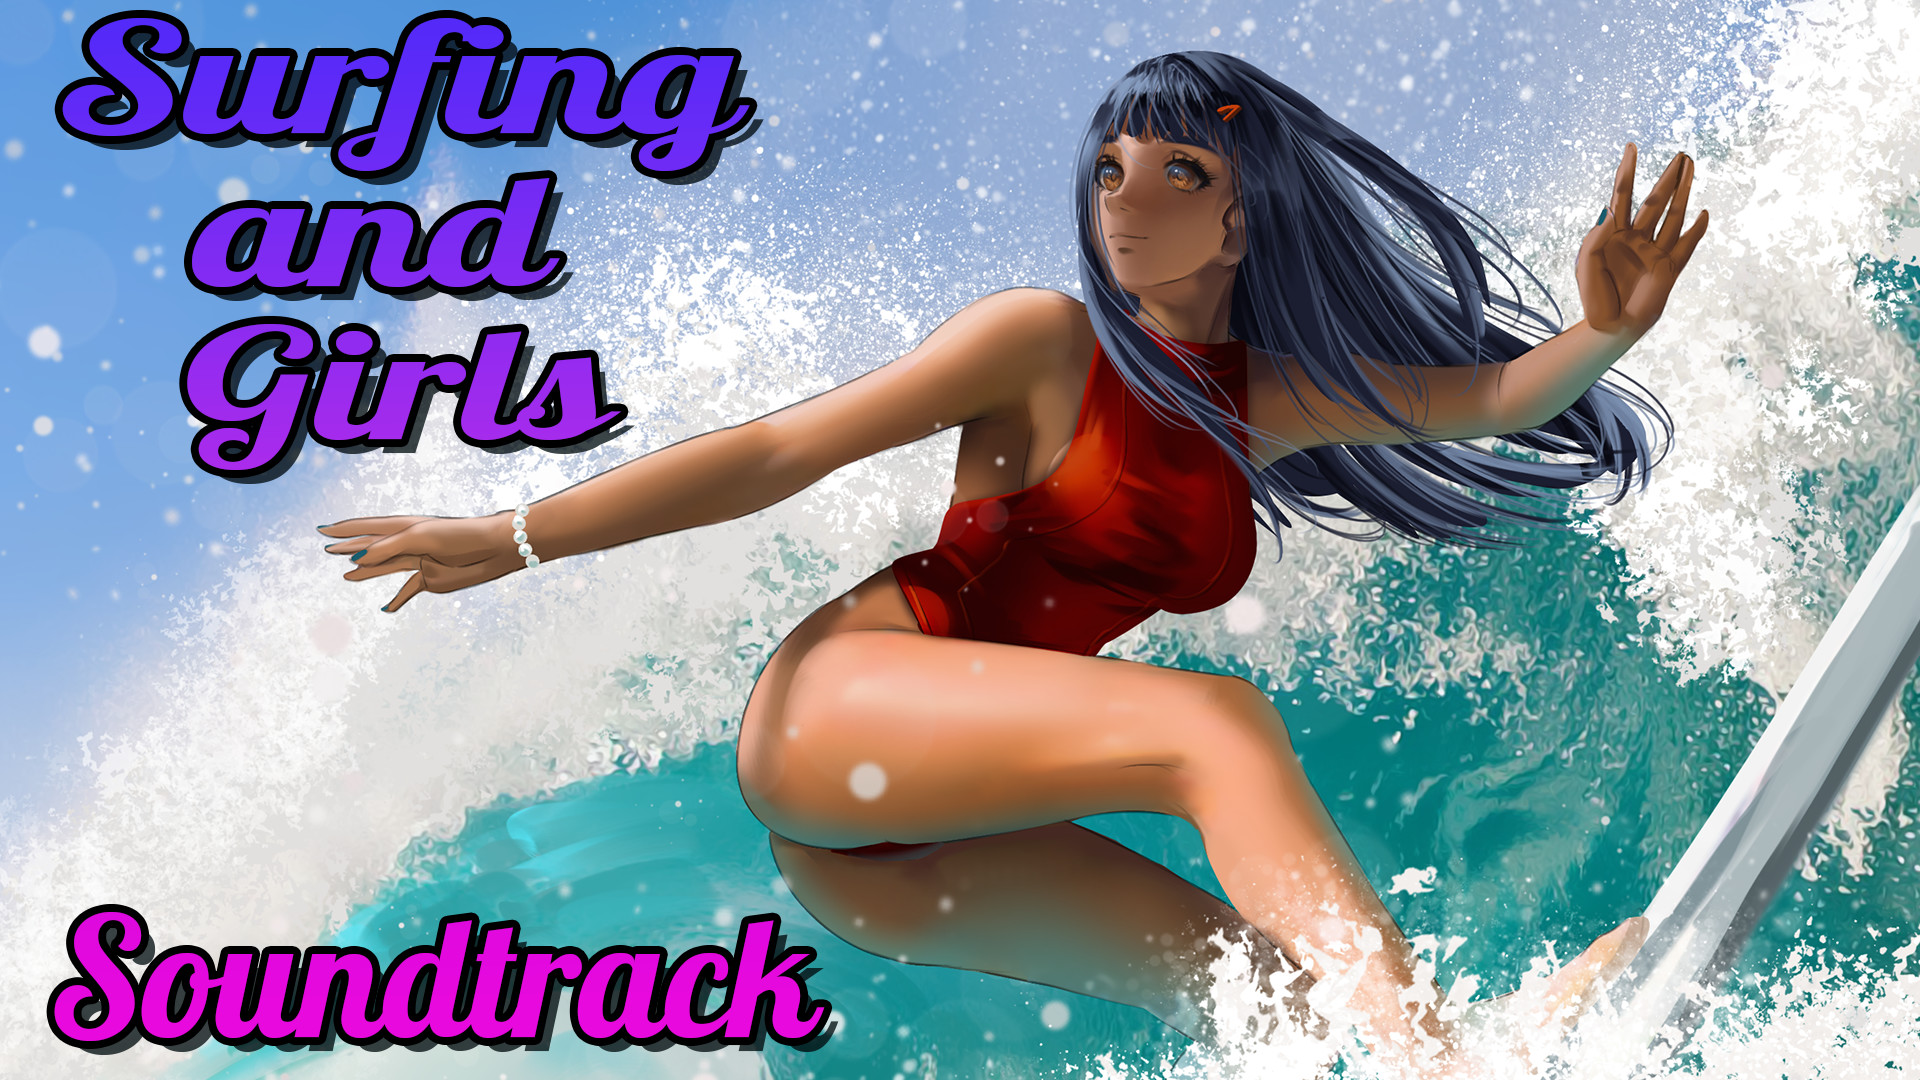 Surfing and Girls Soundtrack Featured Screenshot #1